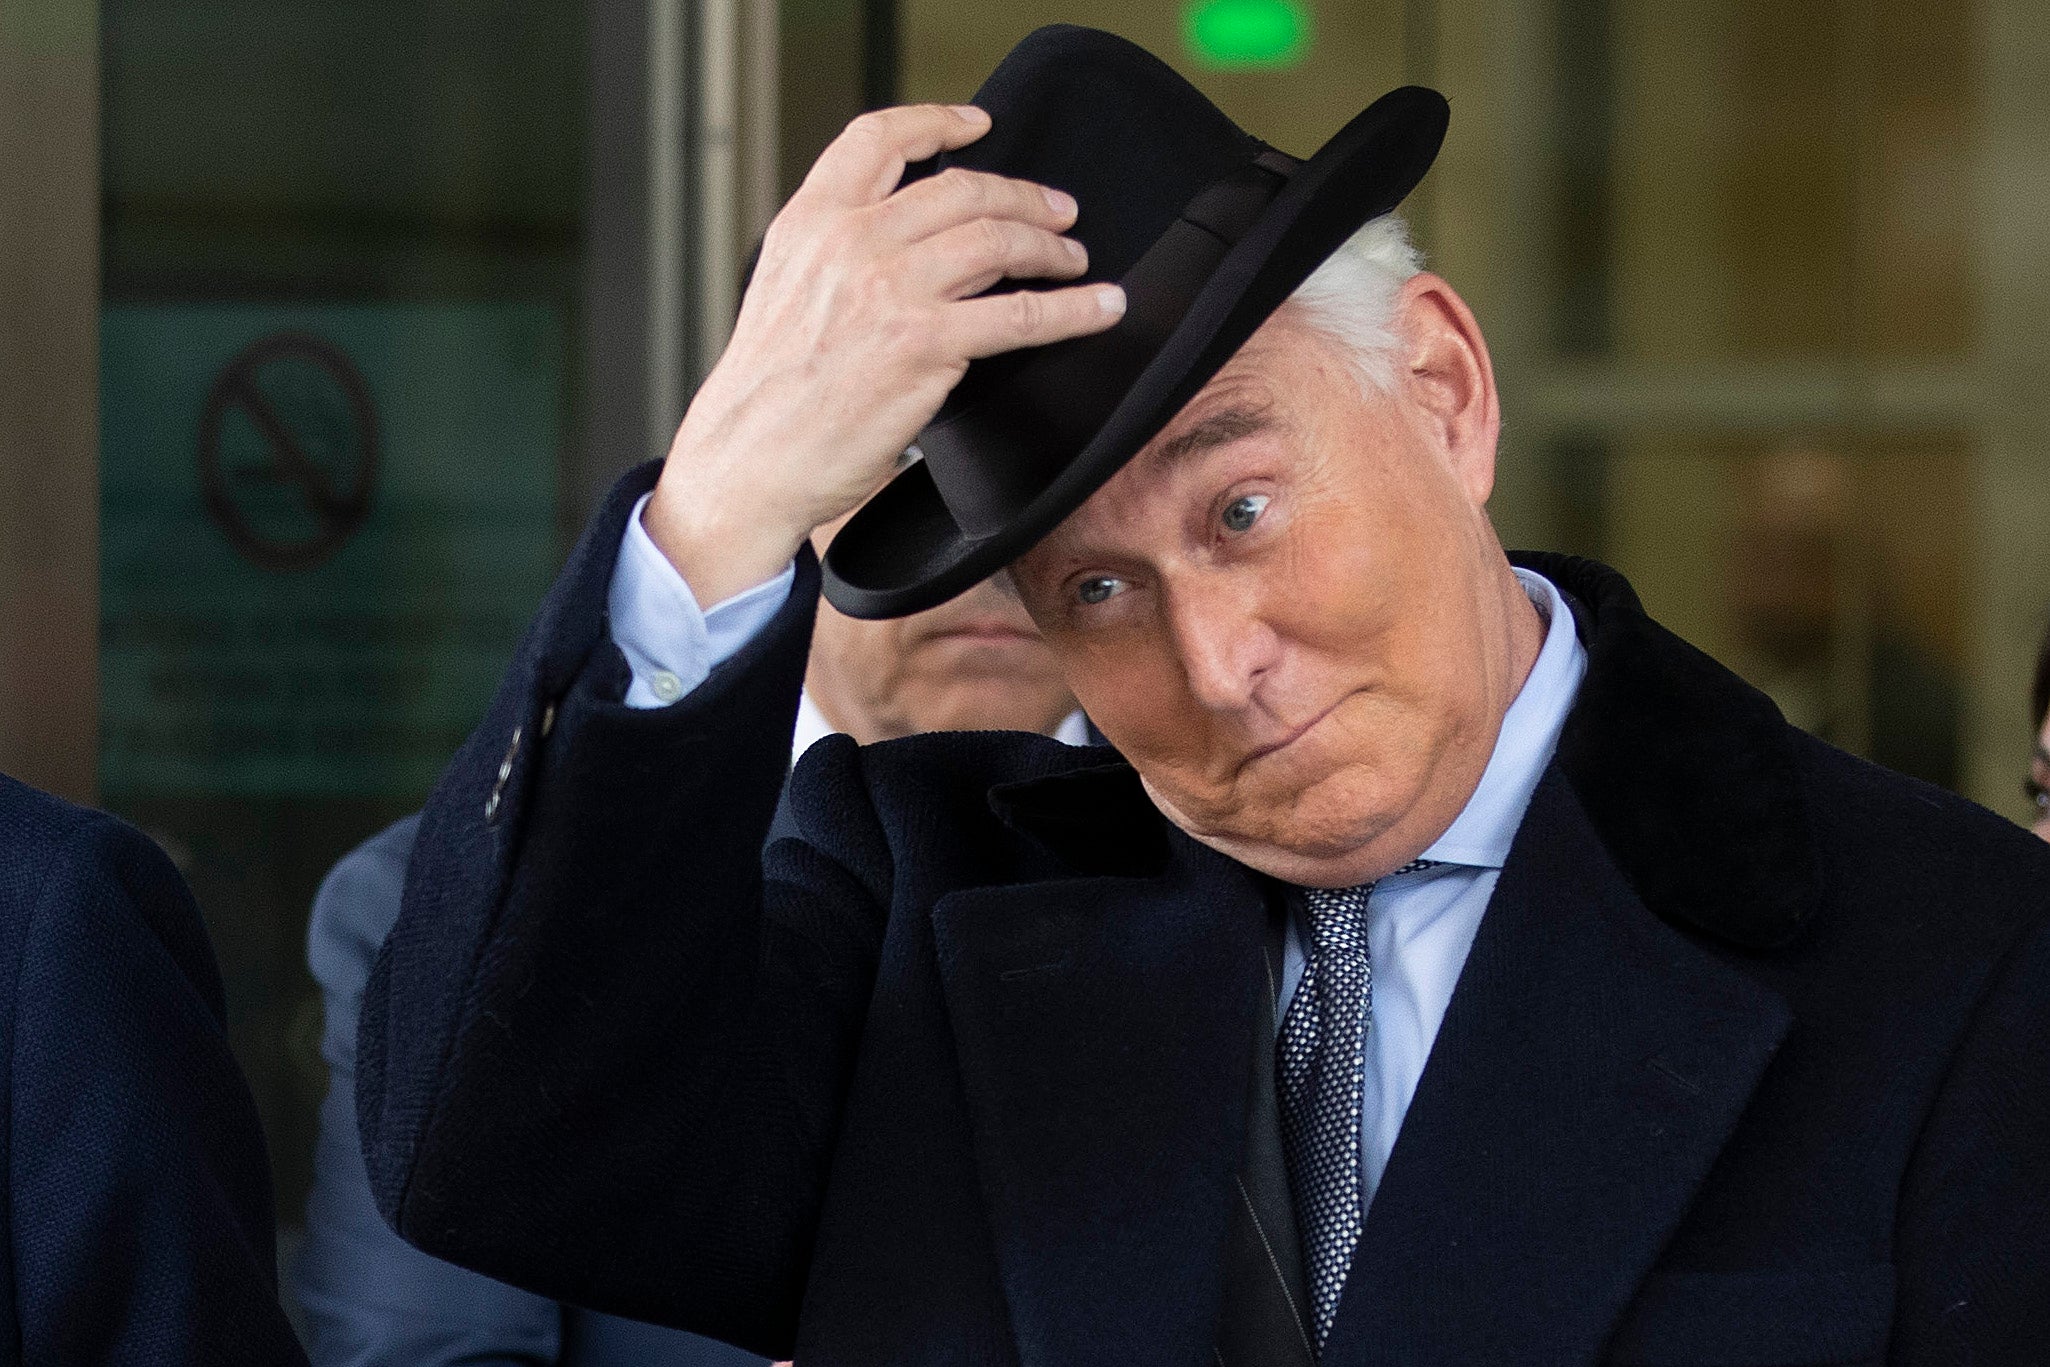 Roger Stone, former adviser and confidante to US President Donald Trump, leaves the Federal District Court for the District of Columbia after being sentenced February 20, 2020 in Washington, DC.